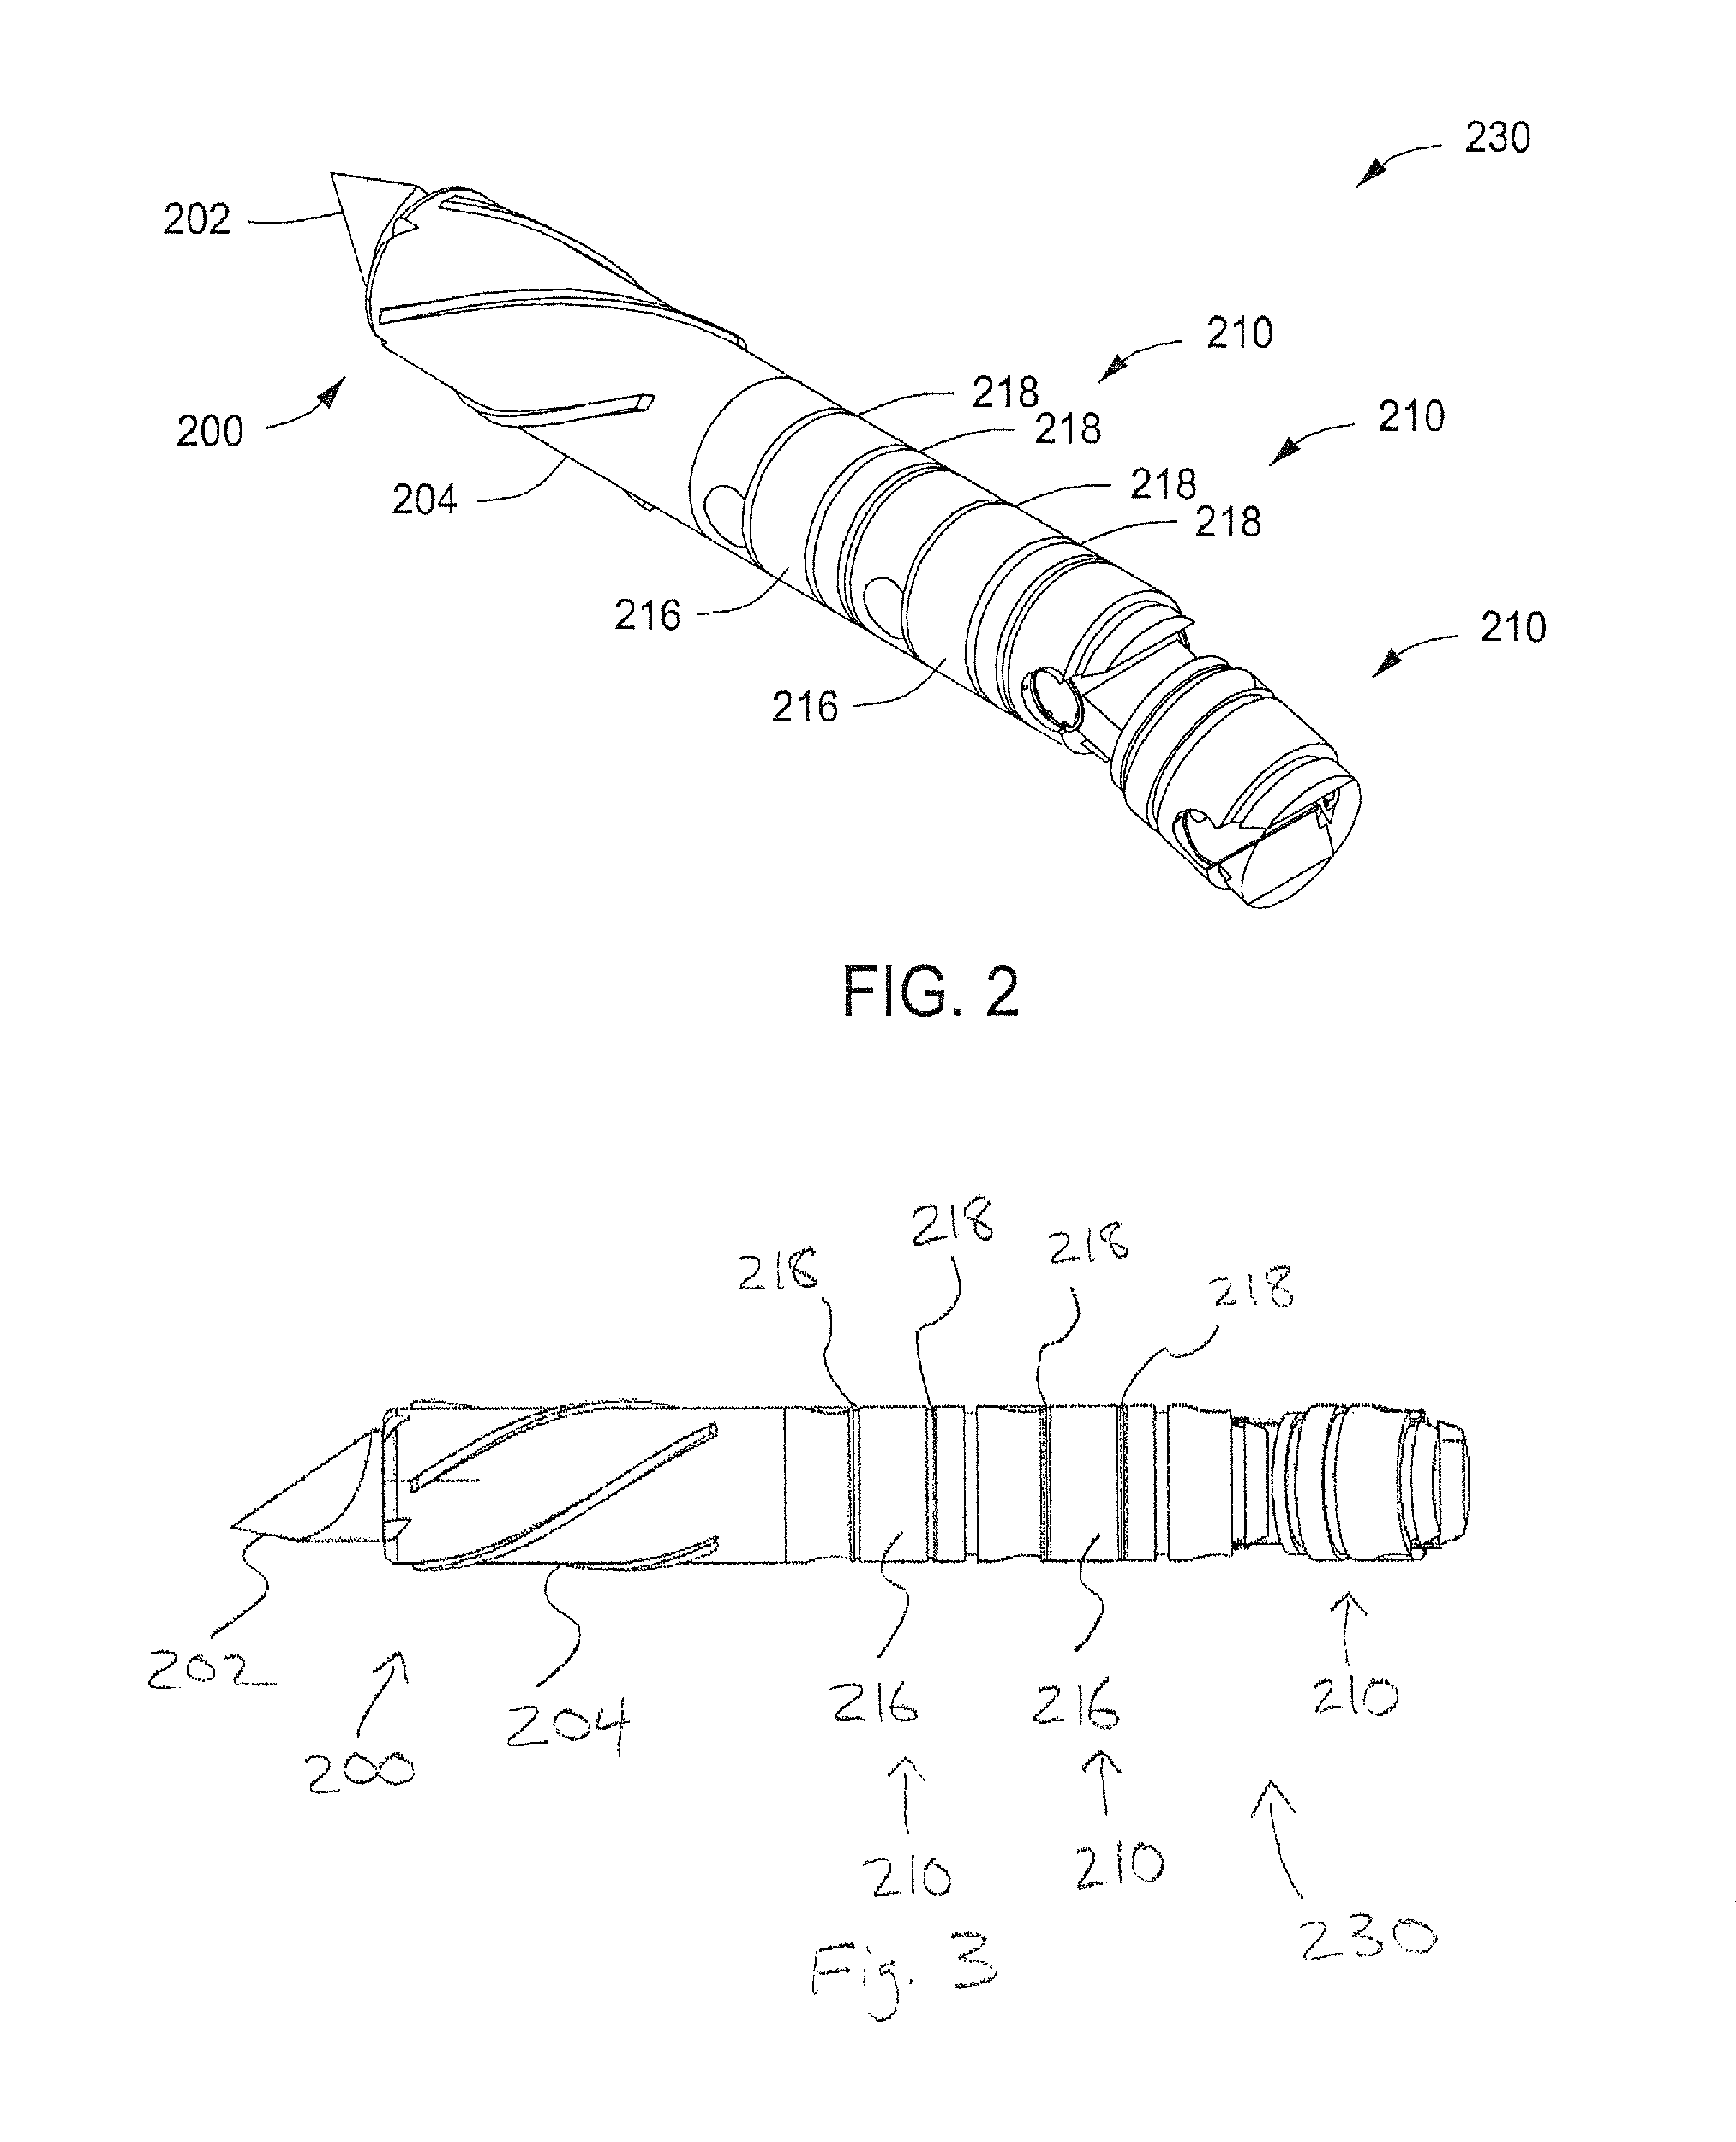 Method for forming a geothermal well